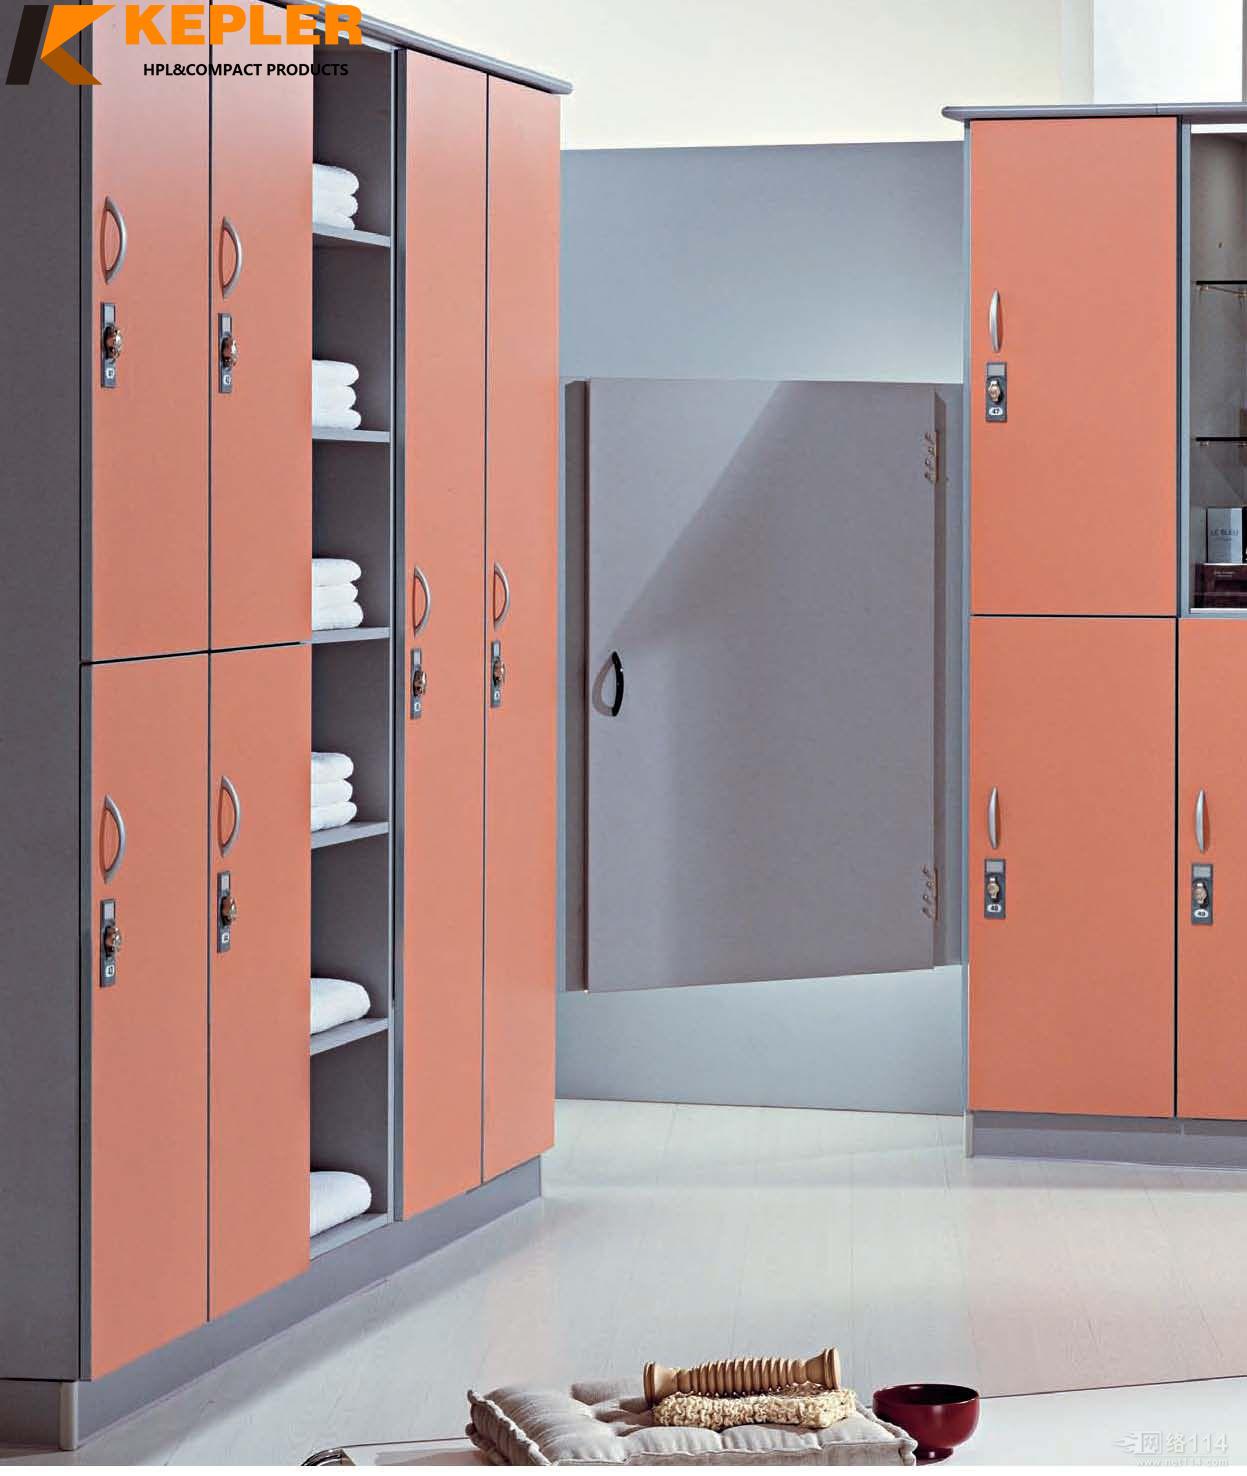 Kepler excellent commercial furniture compact hpl lockers for shopping malls school sauna gym with factory price